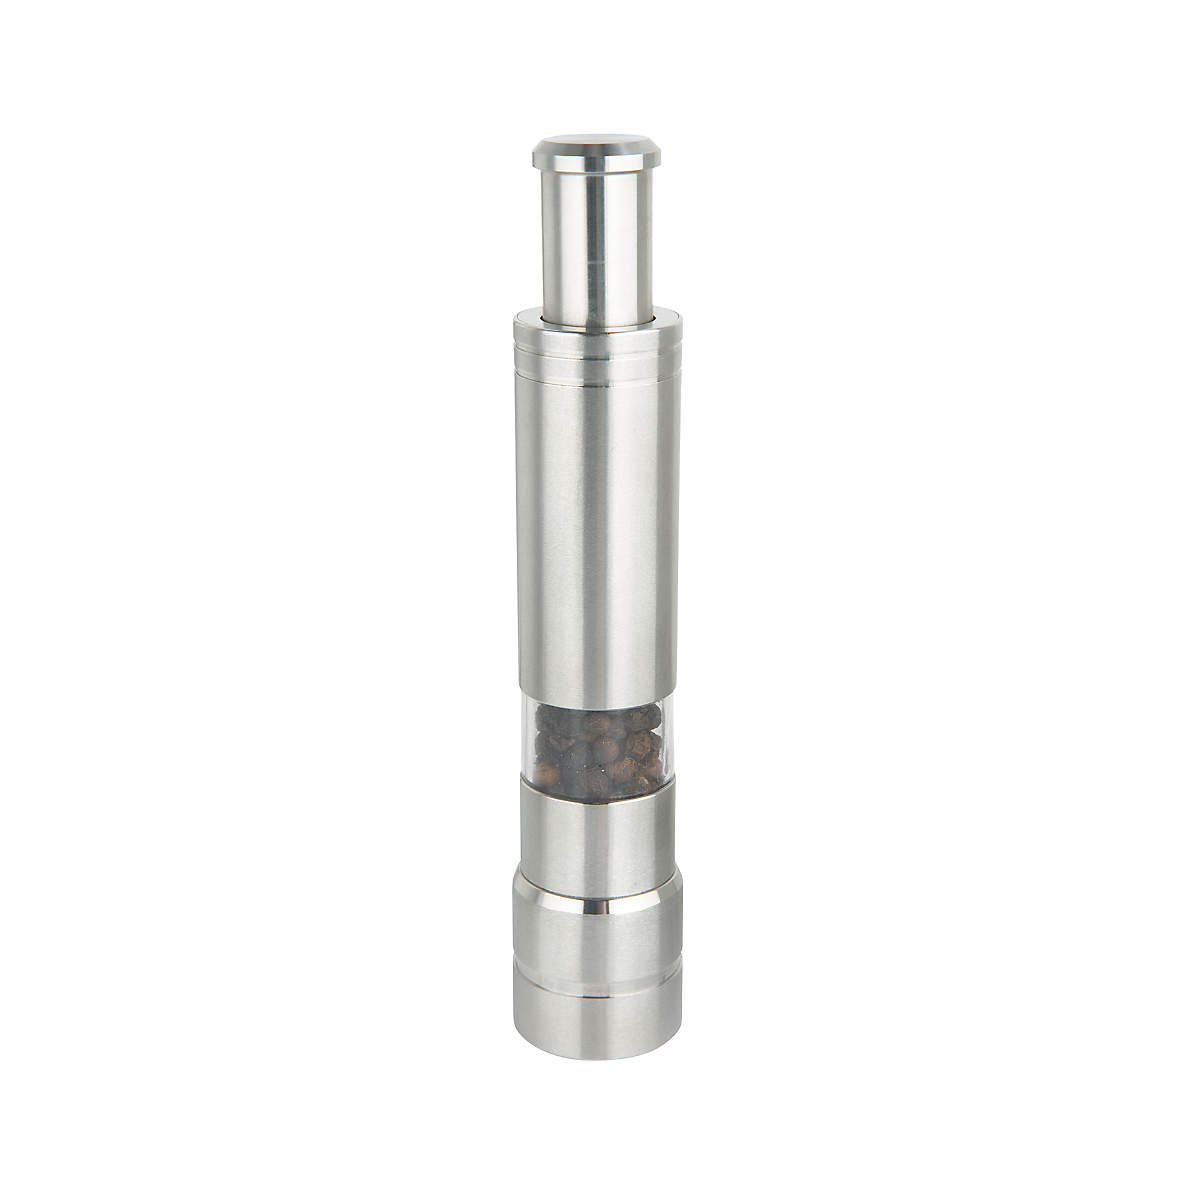 Bueautybox Stainless Steel Pepper Mills with One Hand Stands Mini